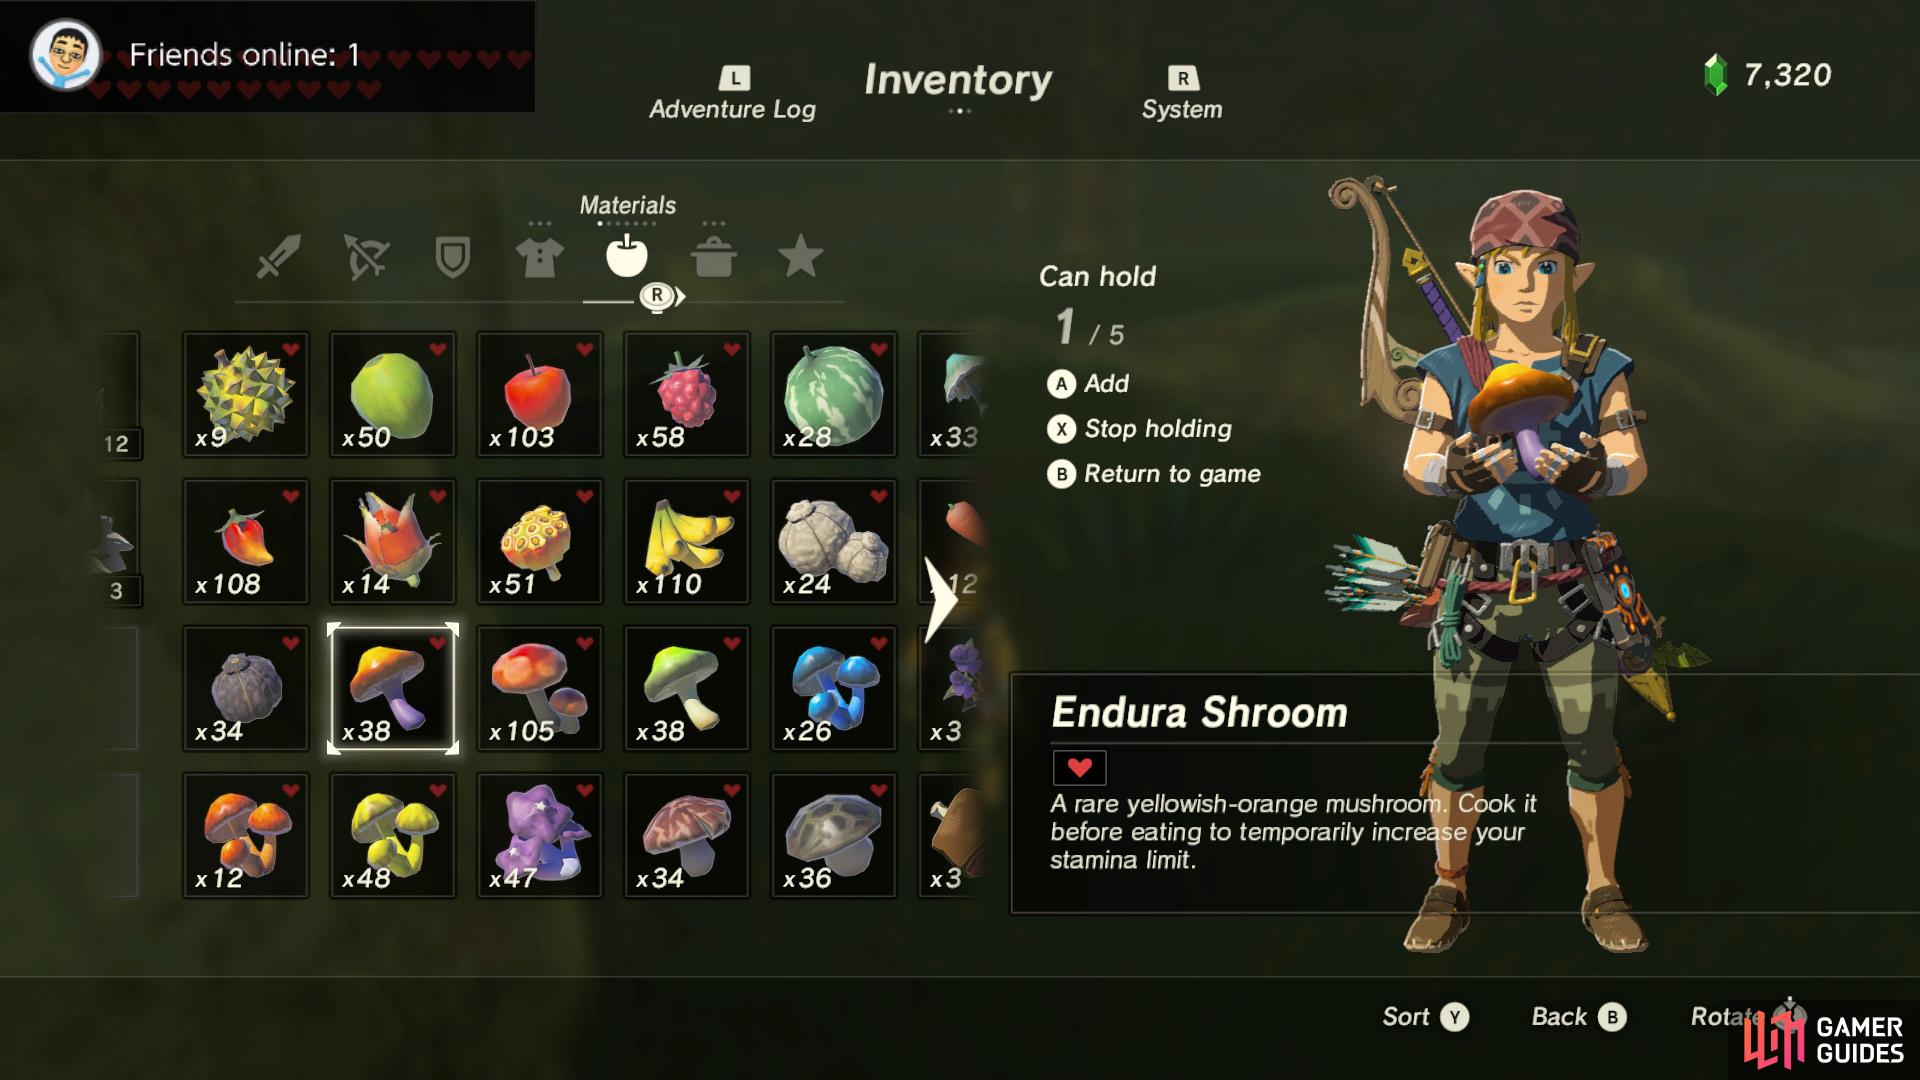 Cook an Endura Shroom to extend your stamina wheel.